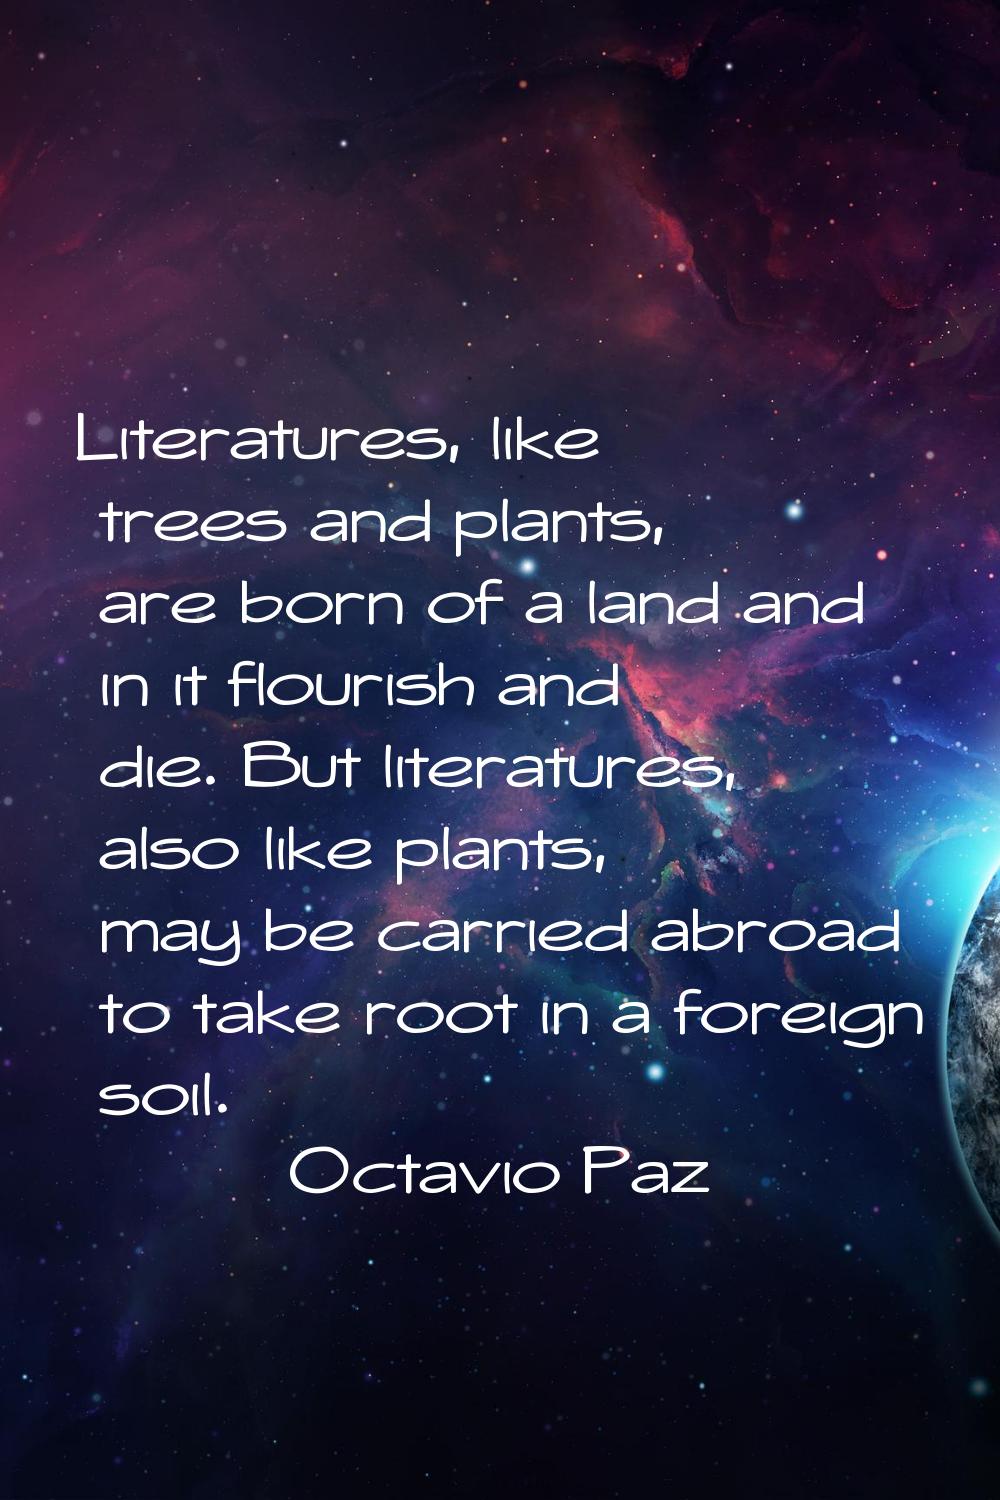 Literatures, like trees and plants, are born of a land and in it flourish and die. But literatures,